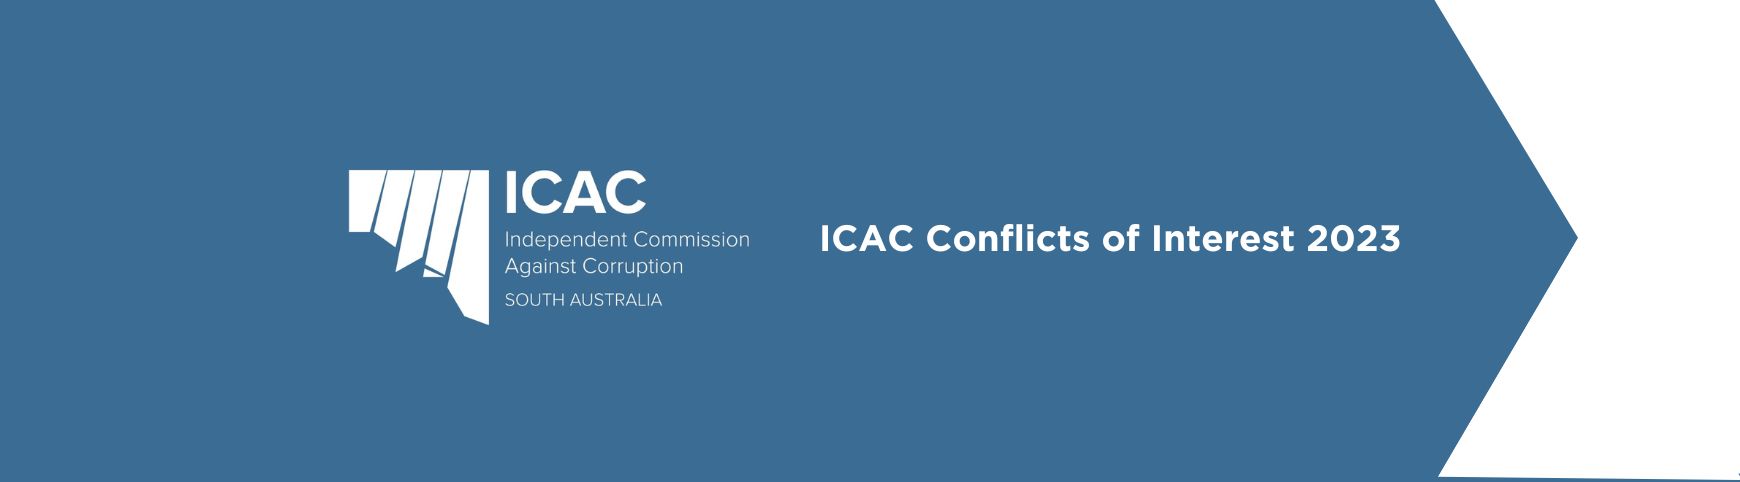 ICAC Conflicts of Interest 2023